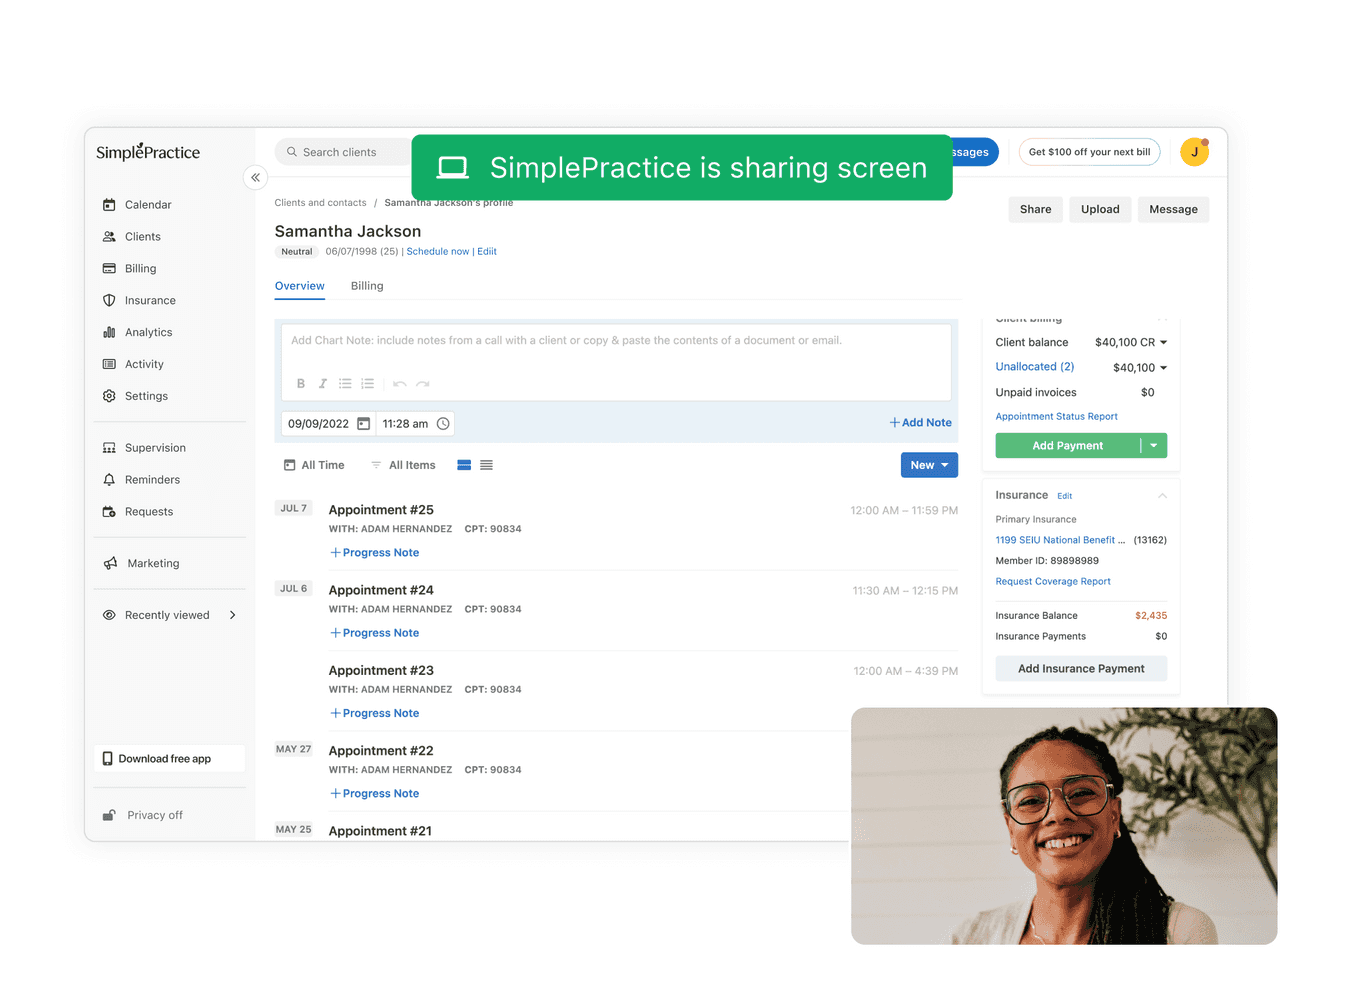 Graphic of SimplePractice platform with screen share enabled, overlaid by image of a woman smiling